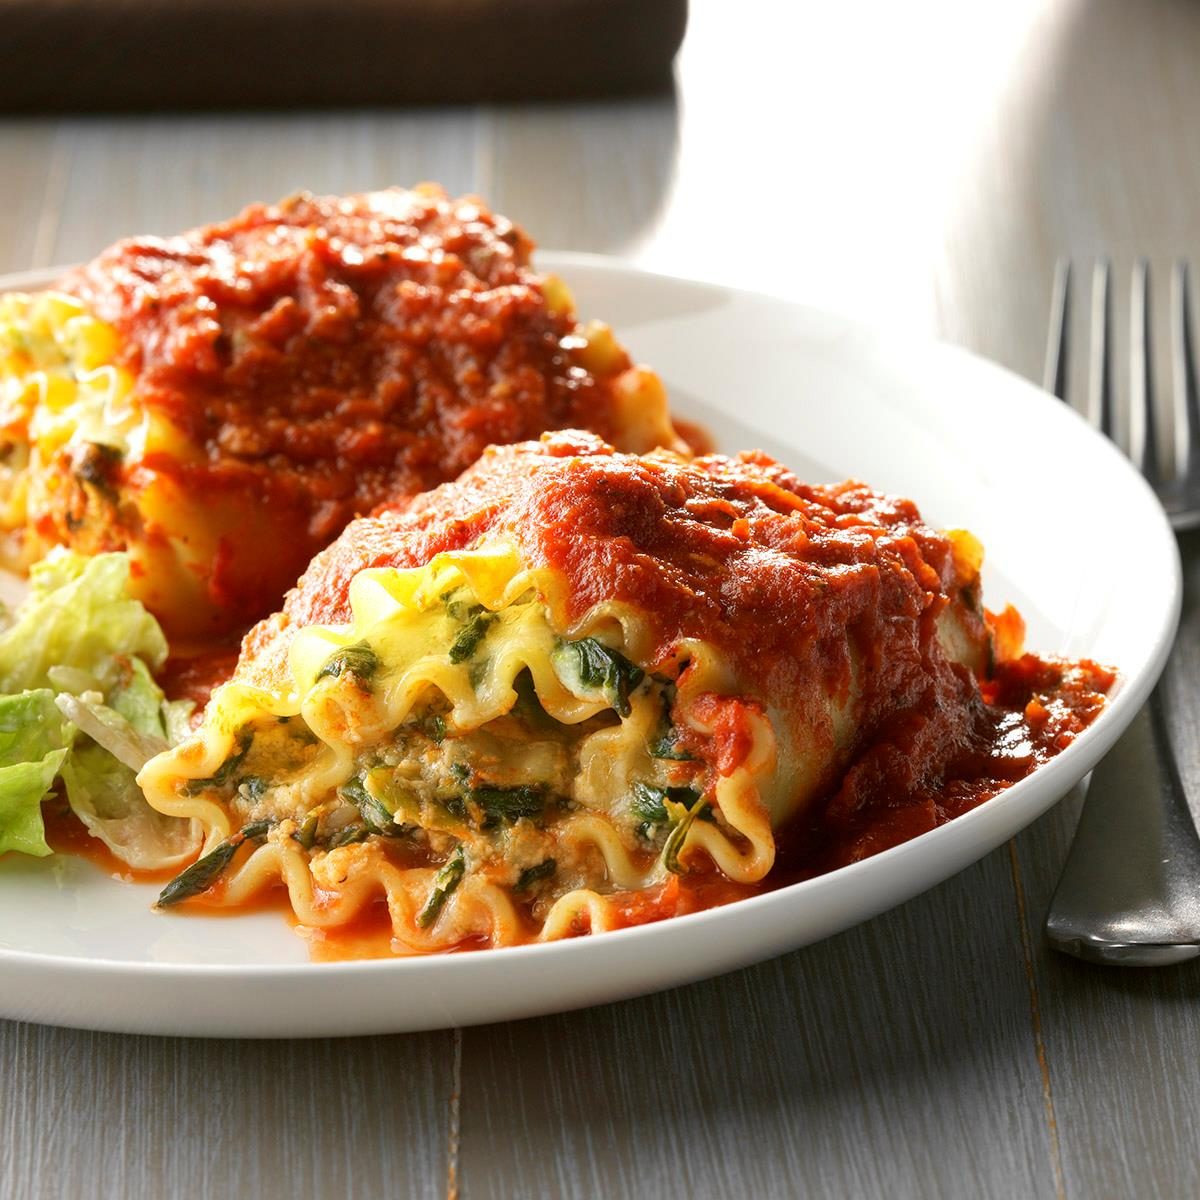 chicken spinach lasagna roll ups with red sauce